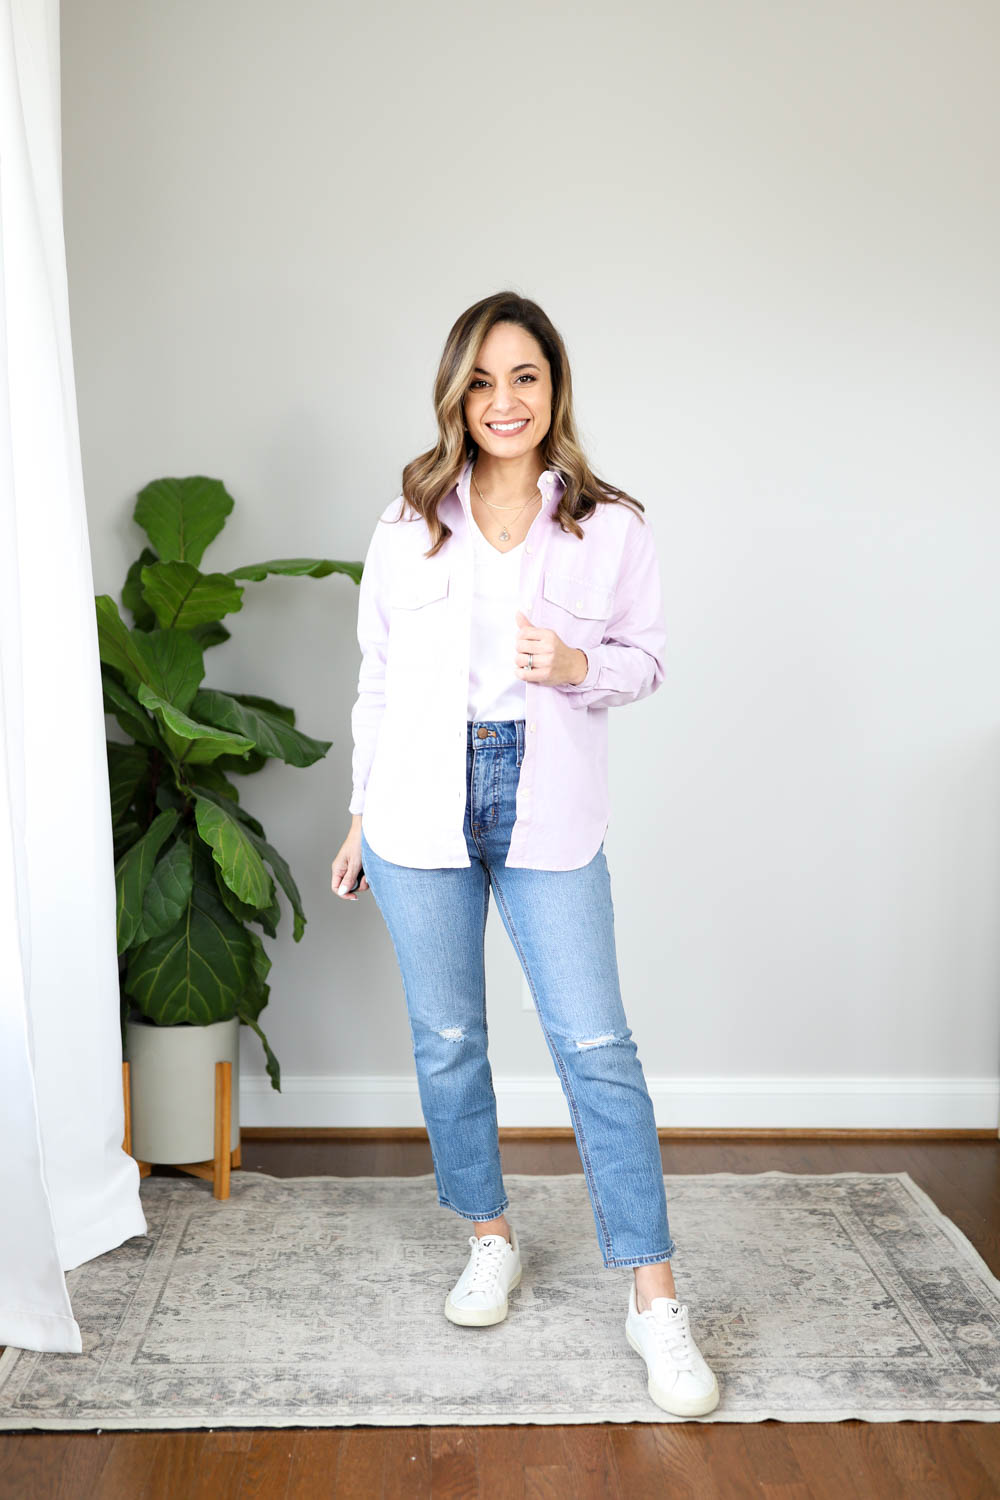 Ad: @nellycom My favorite casual and classy spring outfits from